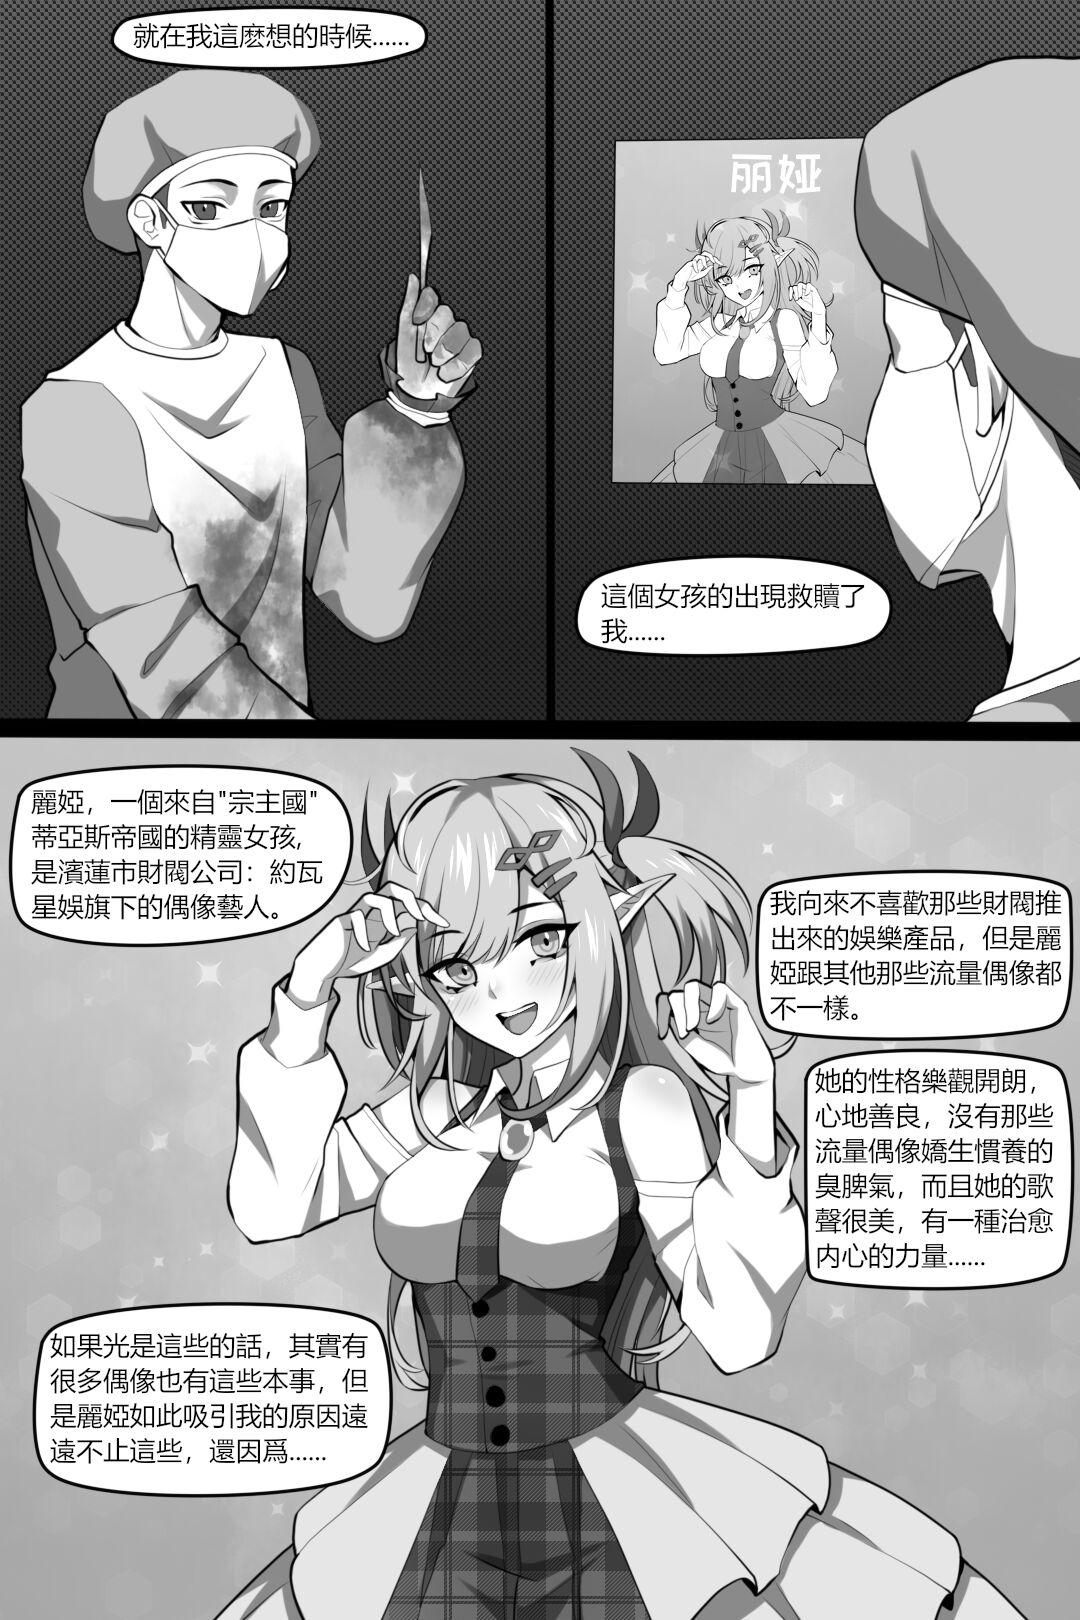 Puta Bin Lian City Stories Chapter 3: Corrupted Forensic - Original Leather - Page 4